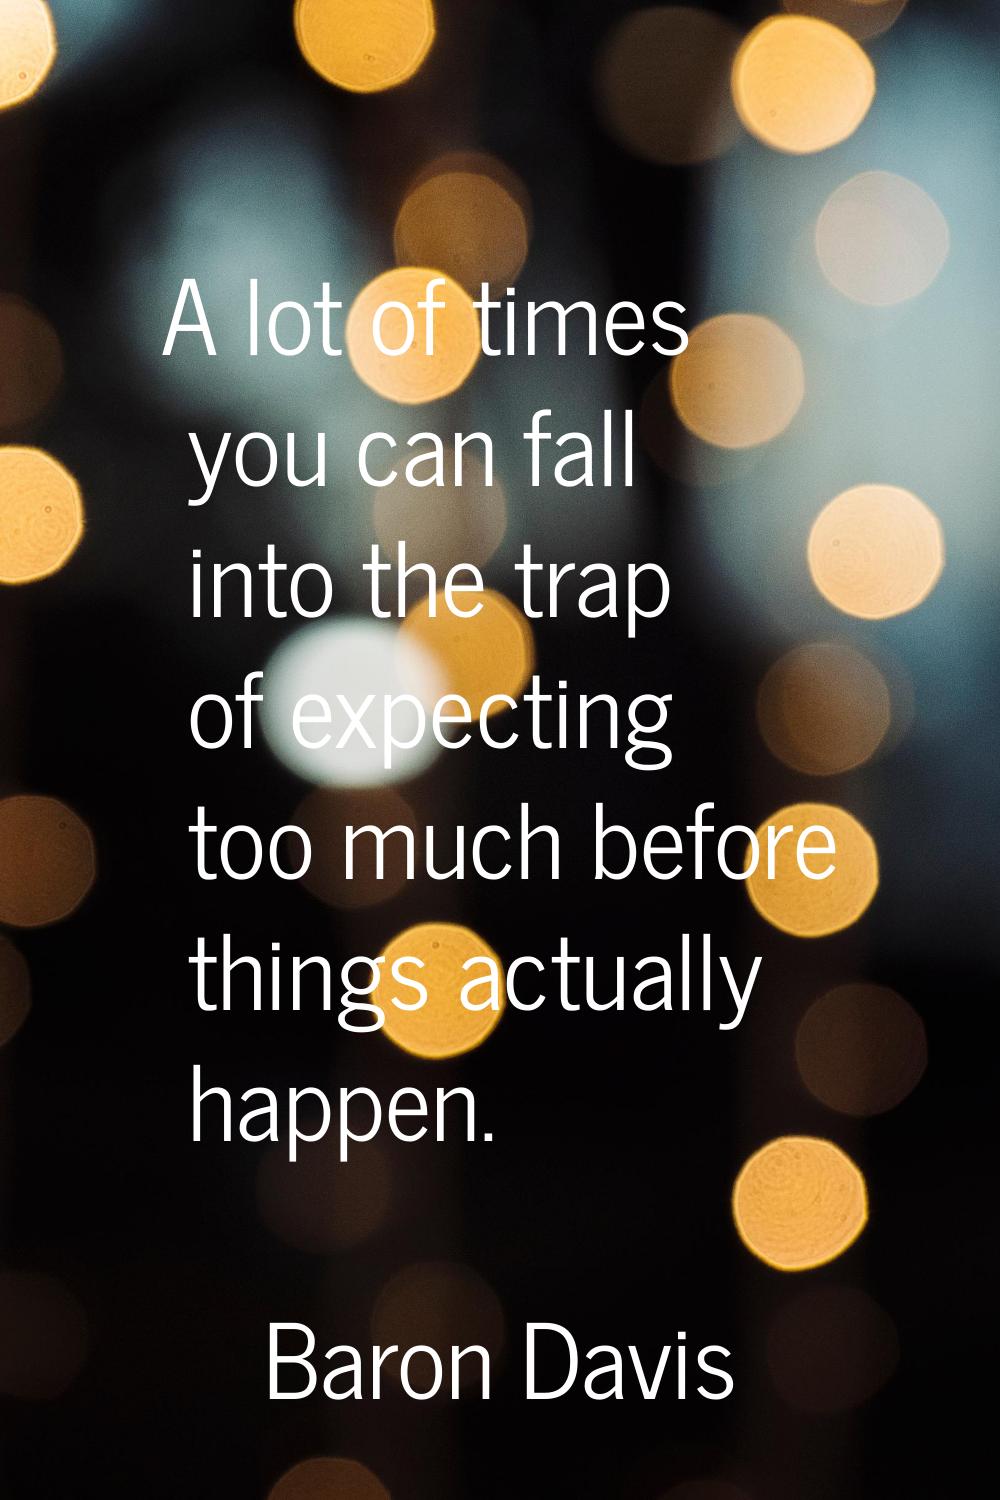 A lot of times you can fall into the trap of expecting too much before things actually happen.